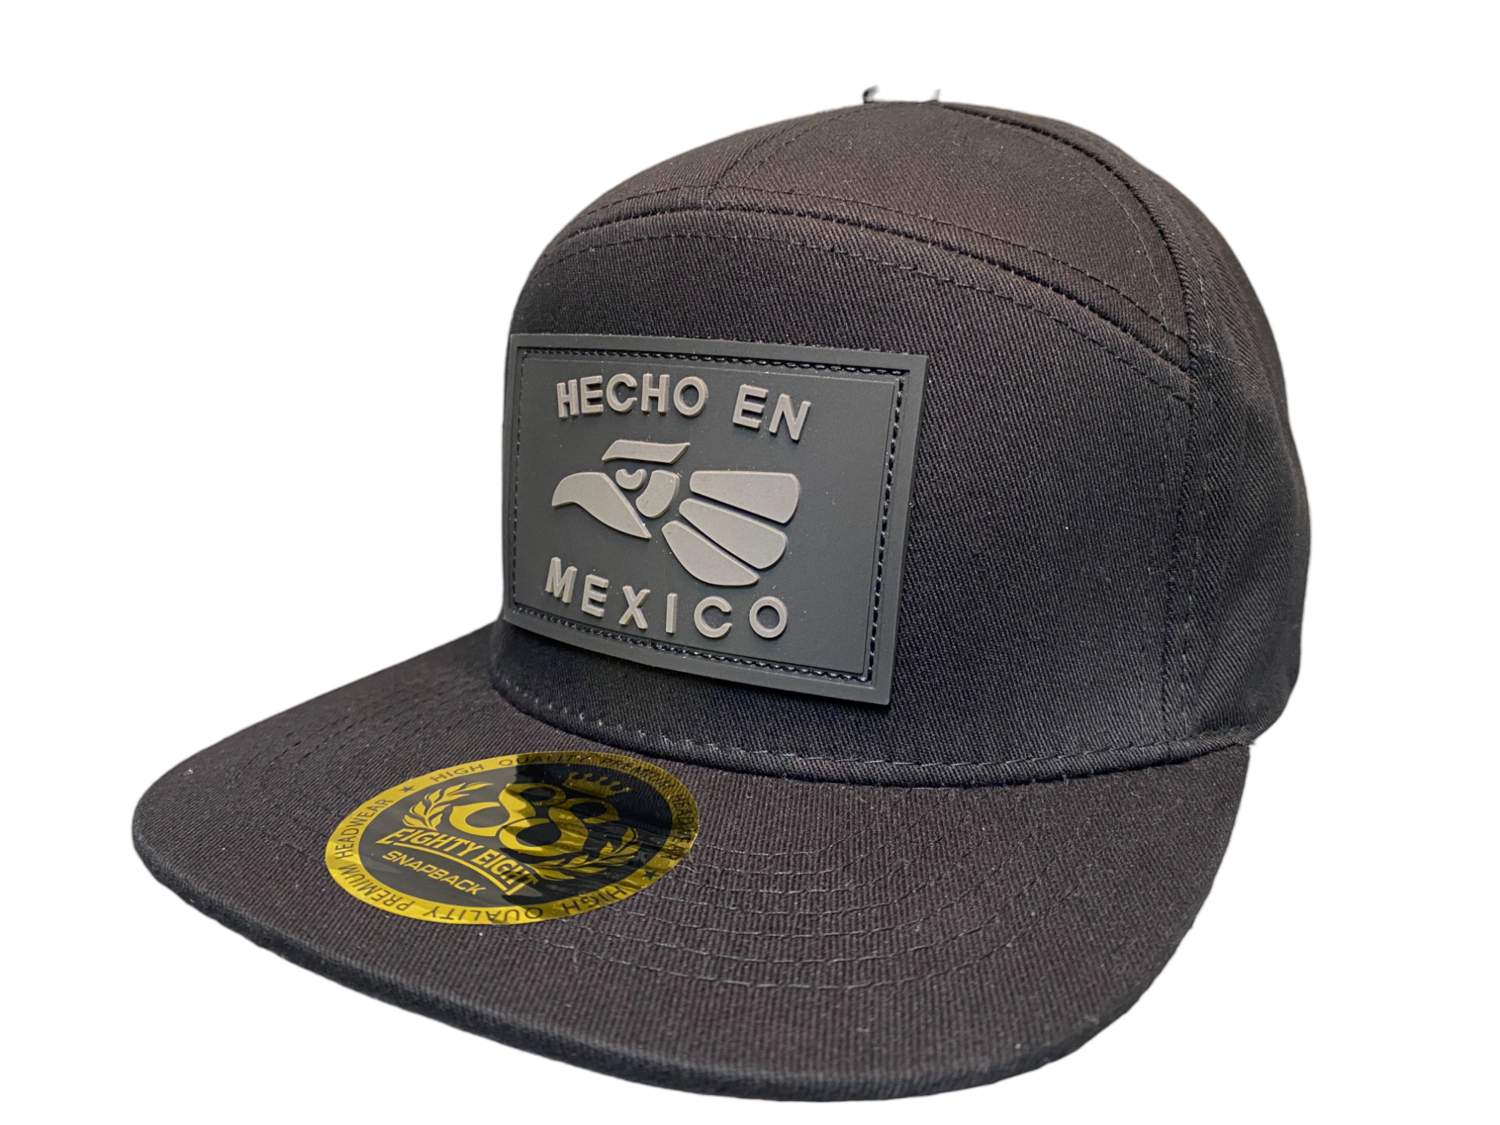 Hecho Eagle Rubber Patch Snapback 6 Panel Adjustable Snap Fit Hat